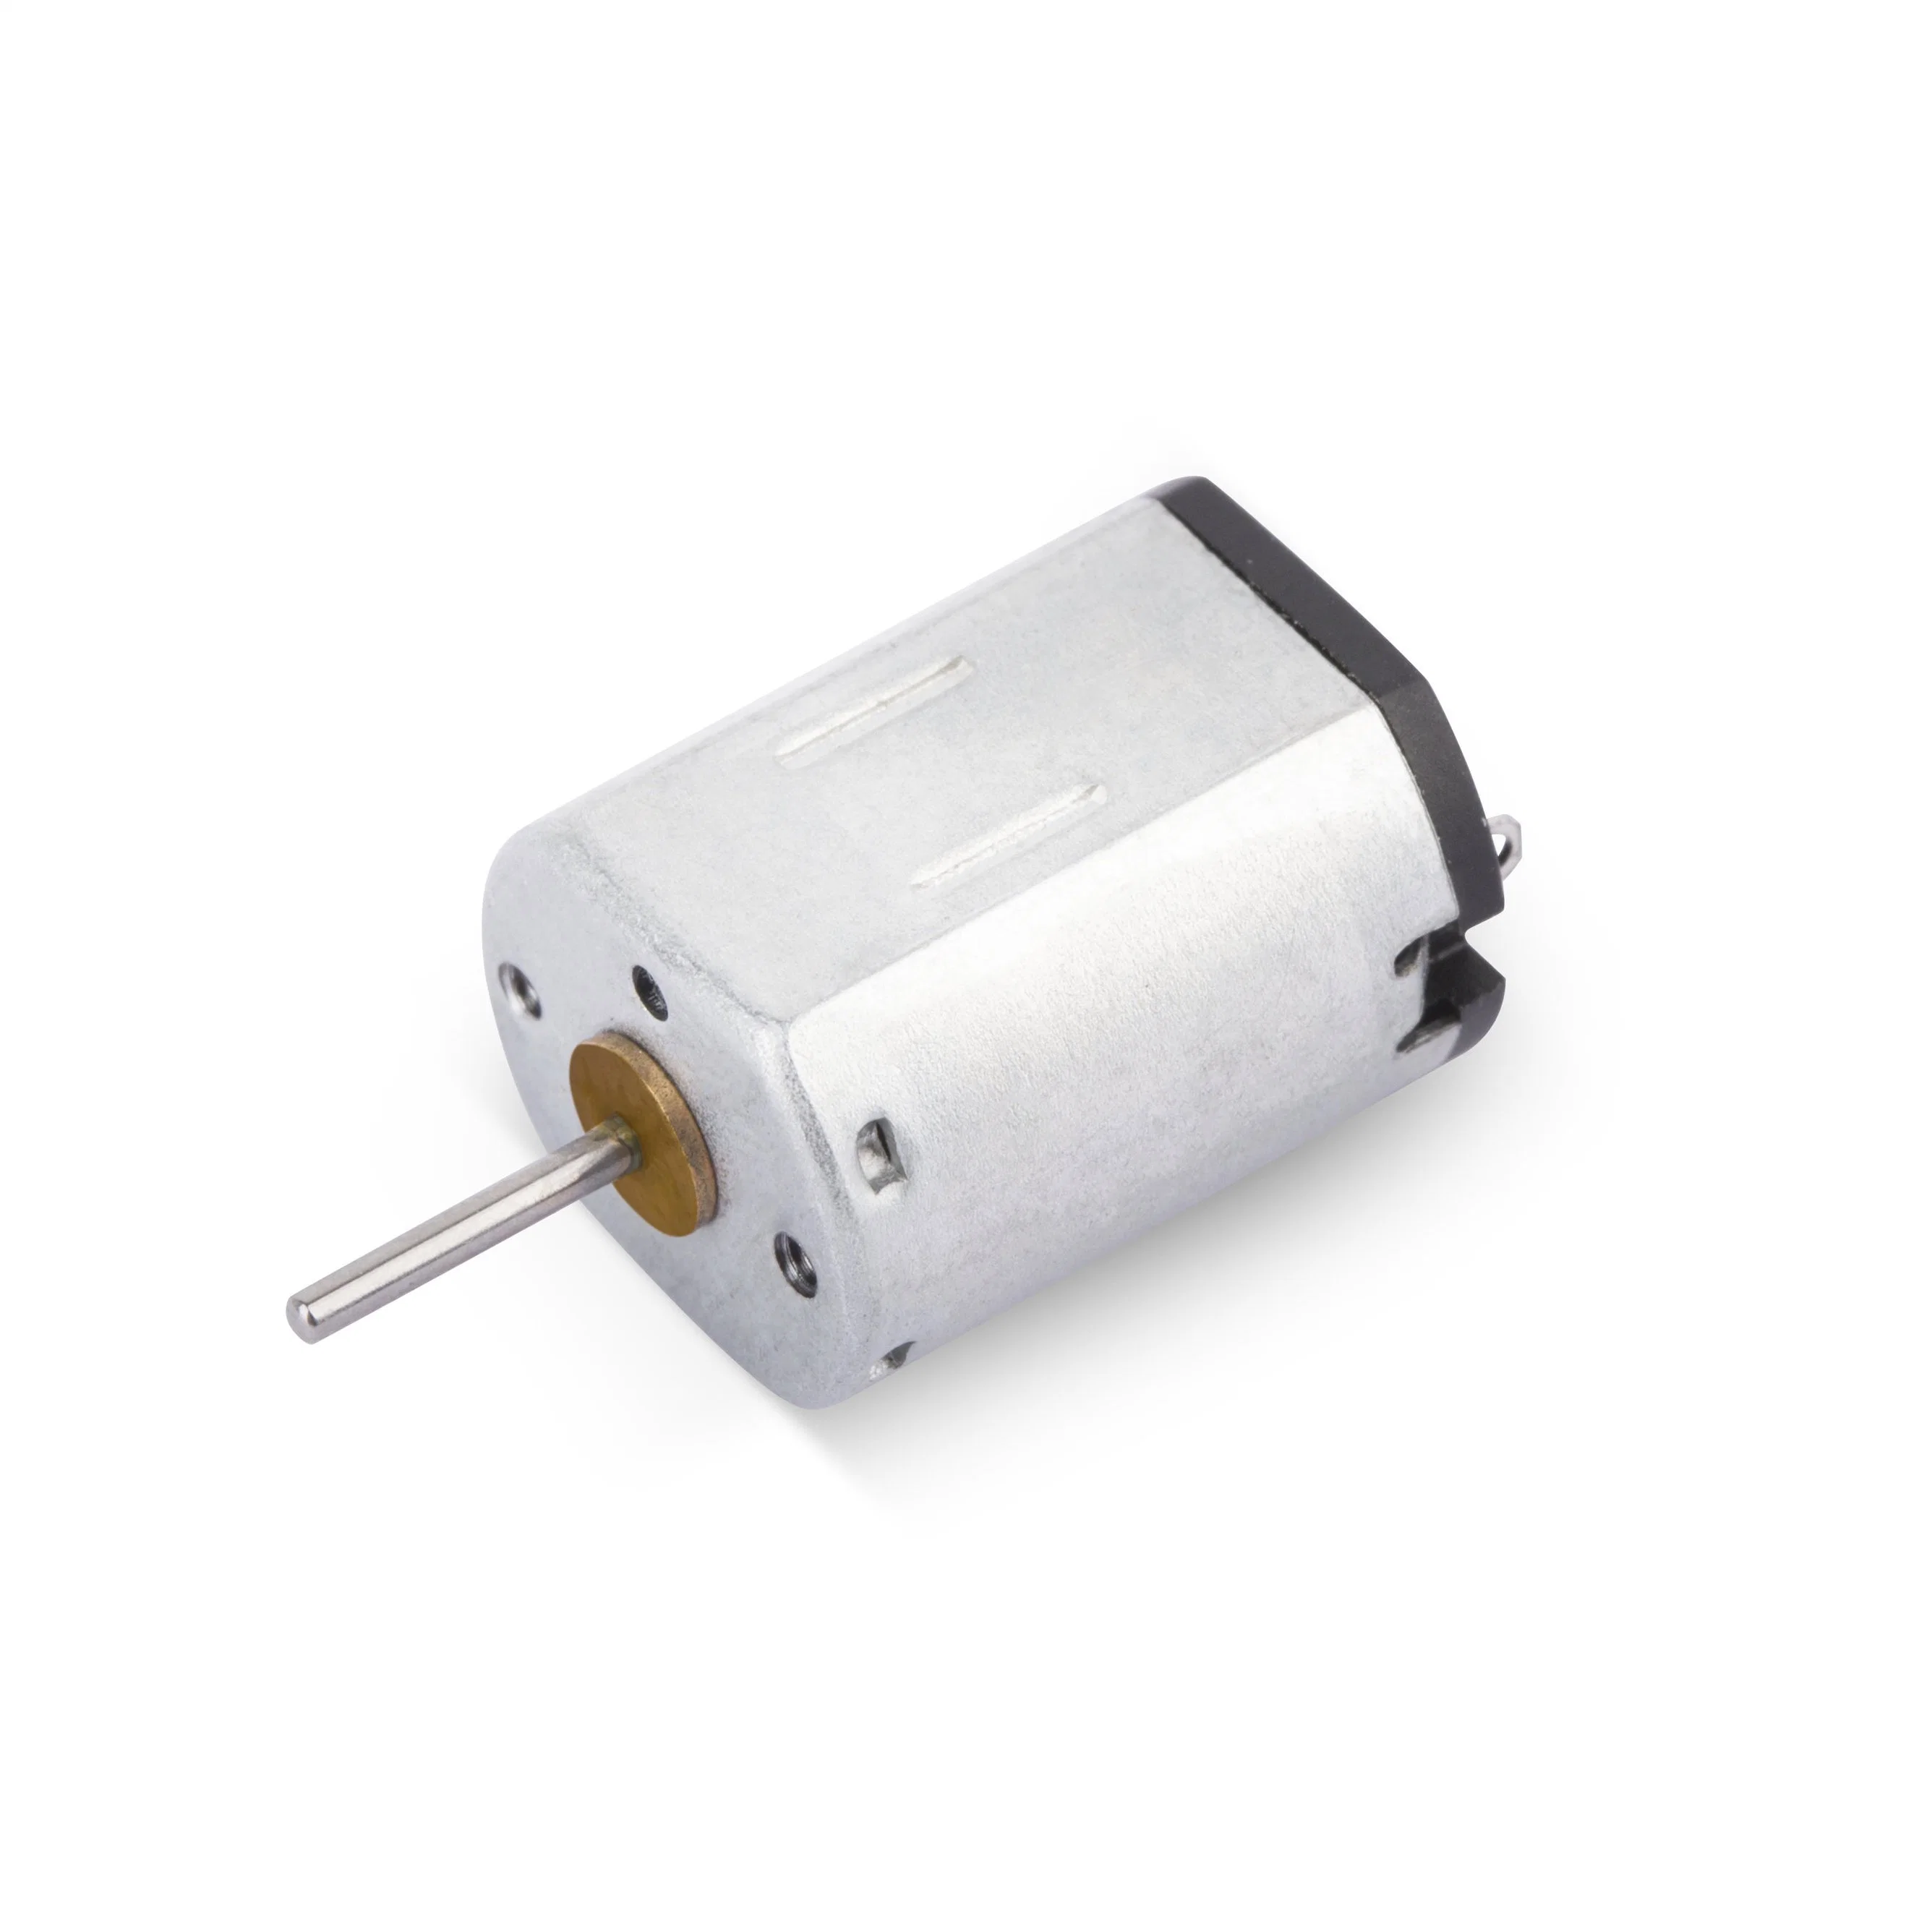 Kinmore 3V DC Motor Vehicle DC Motors Low Noise Micro DC Motor for Beauty Apparatus